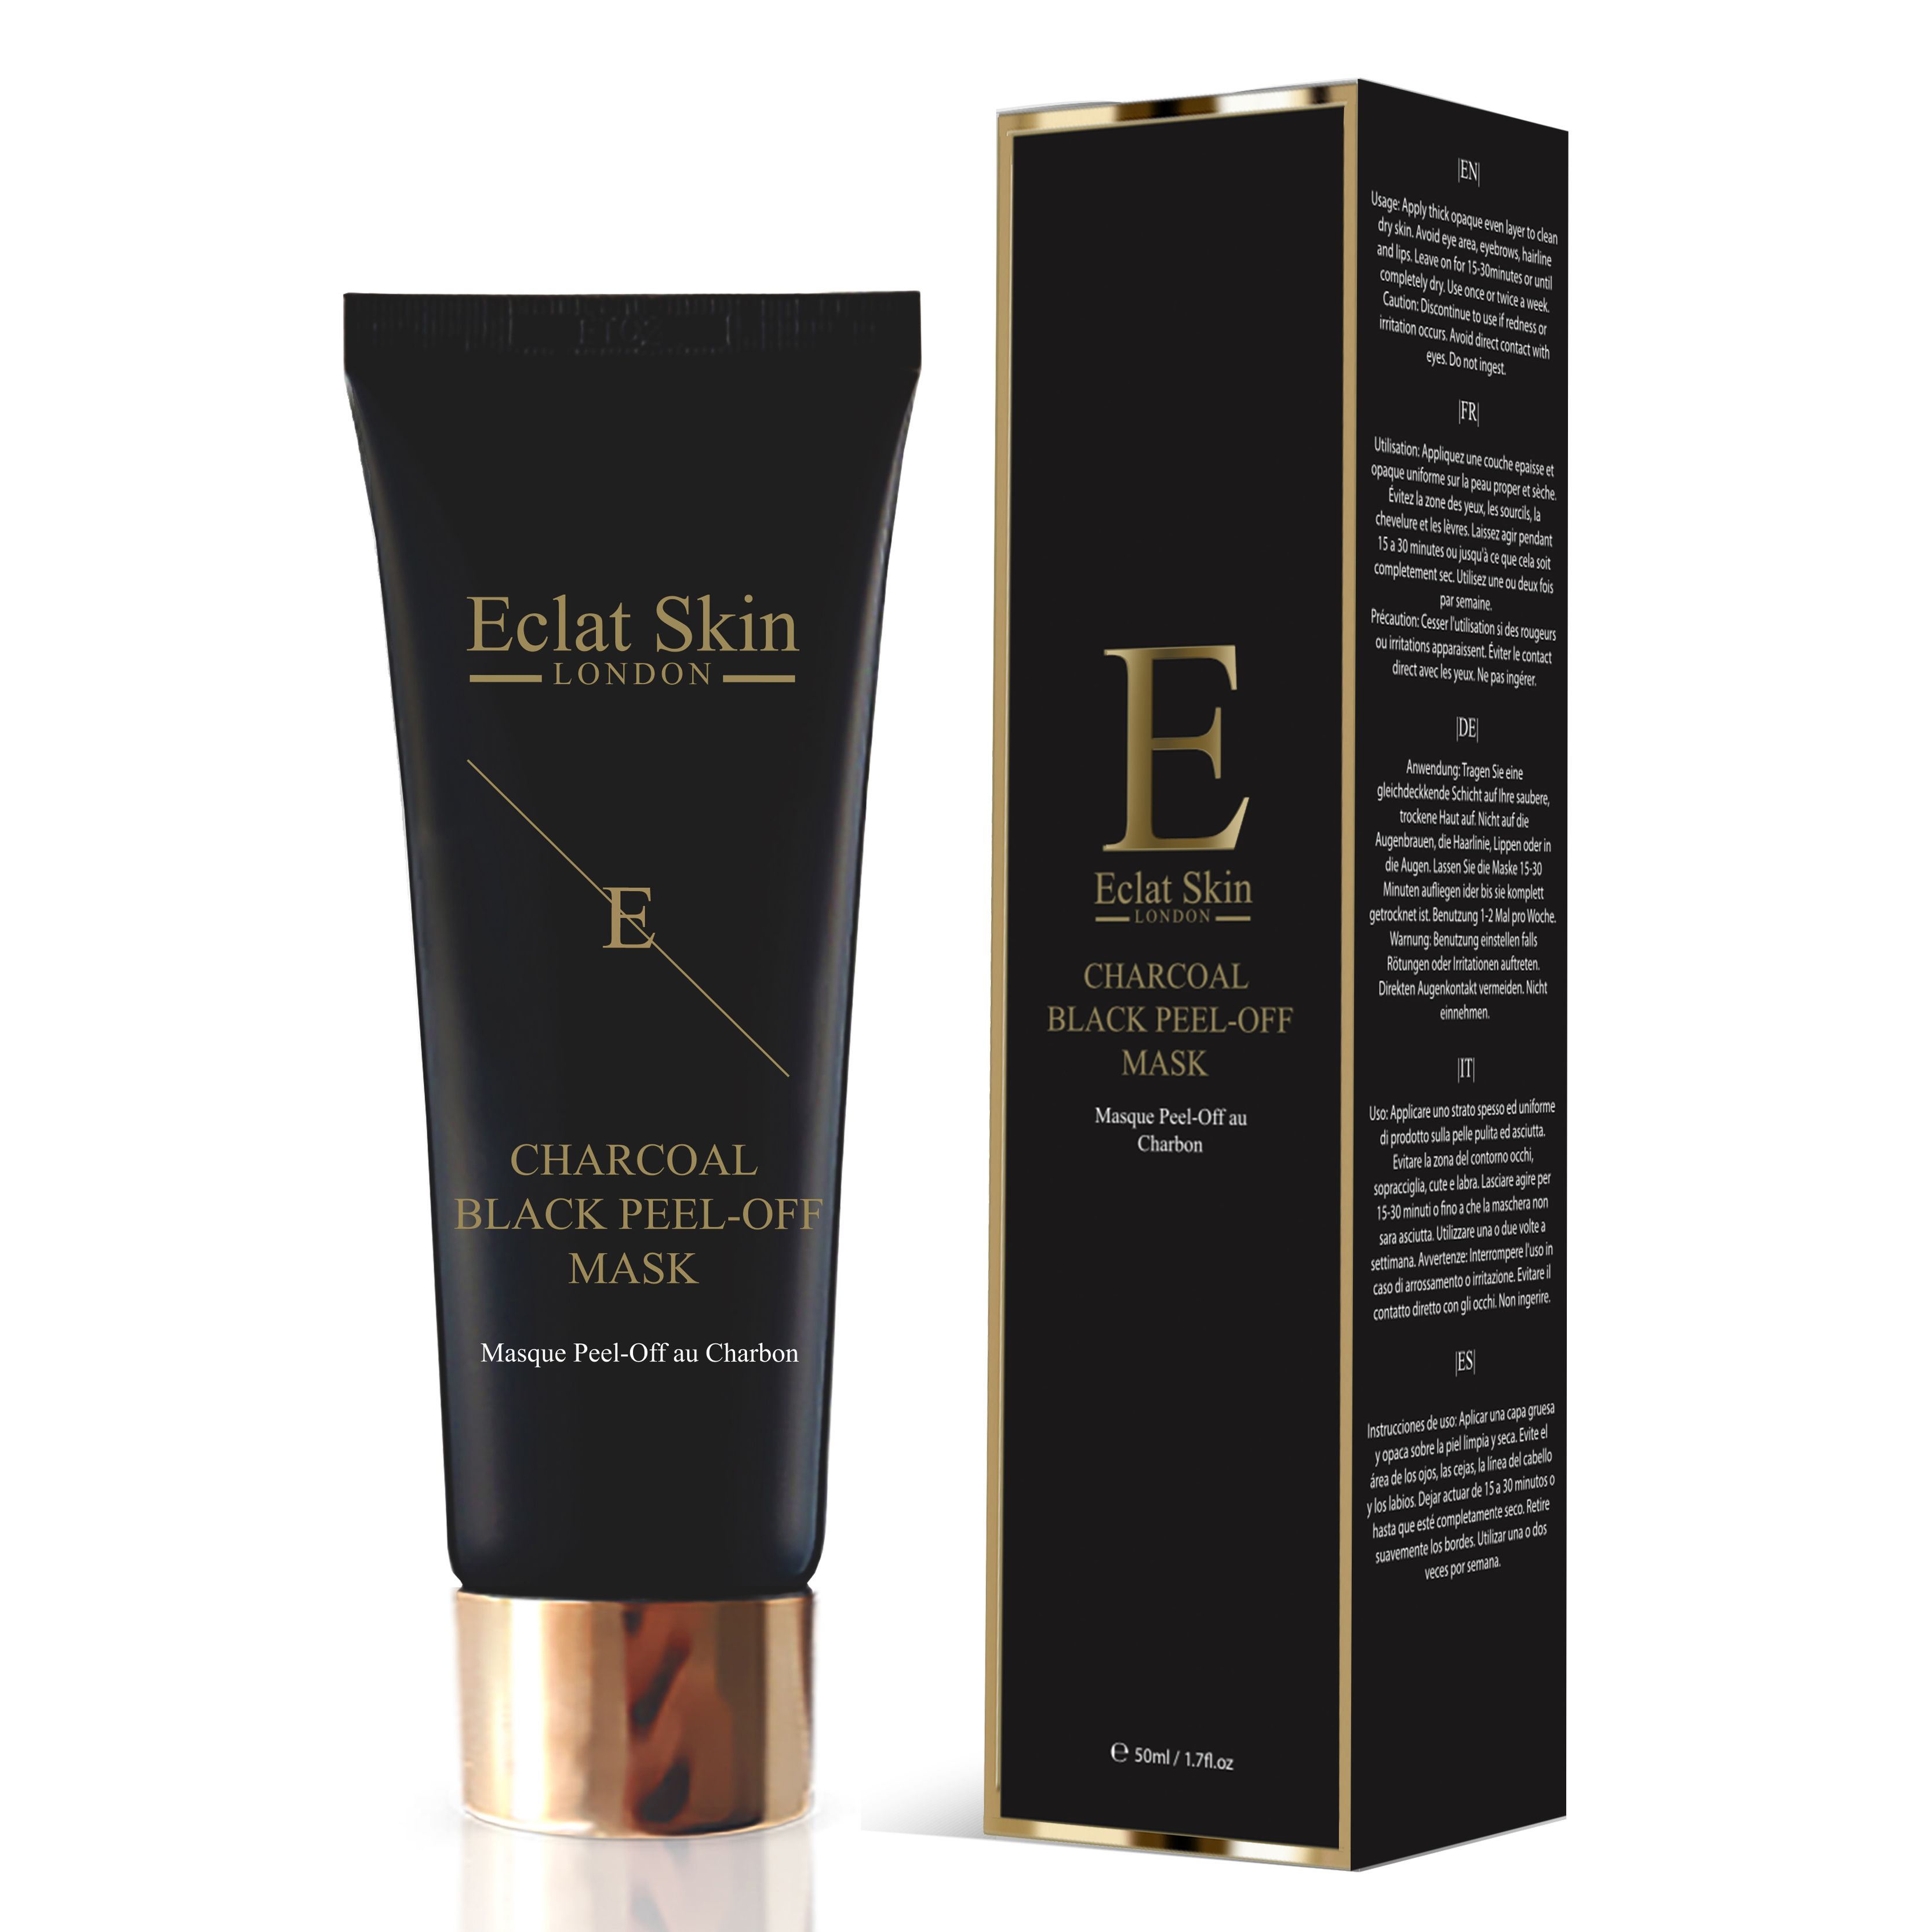 PURIFYING CHARCOAL BLACK PEEL-OFF MASK 24K GOLD - 50ml 

Eclat Skin London’s Purifying Black Peel-Off Mask aims to purify, cleanse and retextures the top layer of the skin. Containing natural bamboo charcoal and white peony root extract this peel of mask is a great treatment for dull, tired looking skin with imperfections. The formula is sticky black gel that is easy to apply even layer to the skin.

Key Ingredients:

BAMBOO CHARCOAL
Bamboo Charcoal has a long history of use first documented in China in 1486 AD, during the Ming Dynasty. The Activated Bamboo Charcoal is so fine that it can act like a magnet to capture and trap toxins and excess oil by adhering them to itself.Â 

WHITE PEONY ROOT EXTRACT
White Peony root extract aims to sooth and moisturise the skin. It is anti-bacterial and works to promote skin healing.

GLYCERIN
Glycerin mimics whatâ€™s known as skinâ€™s natural moisturising factor (NMF), which is why itâ€™s compatible with all skin types, of all ages. It also helps the skin to shield from environmental sources of irritation and aims to Improve skinâ€™s resiliency and youthful look.

Directions for use: Apply thick opaque even layer to clean, dry skin. Avoid eye area, eyebrows, hairline and lips. Leave on for 15 - 30 minutes or until completely dry. Peel off from the edges gently. Use once or twice a week.